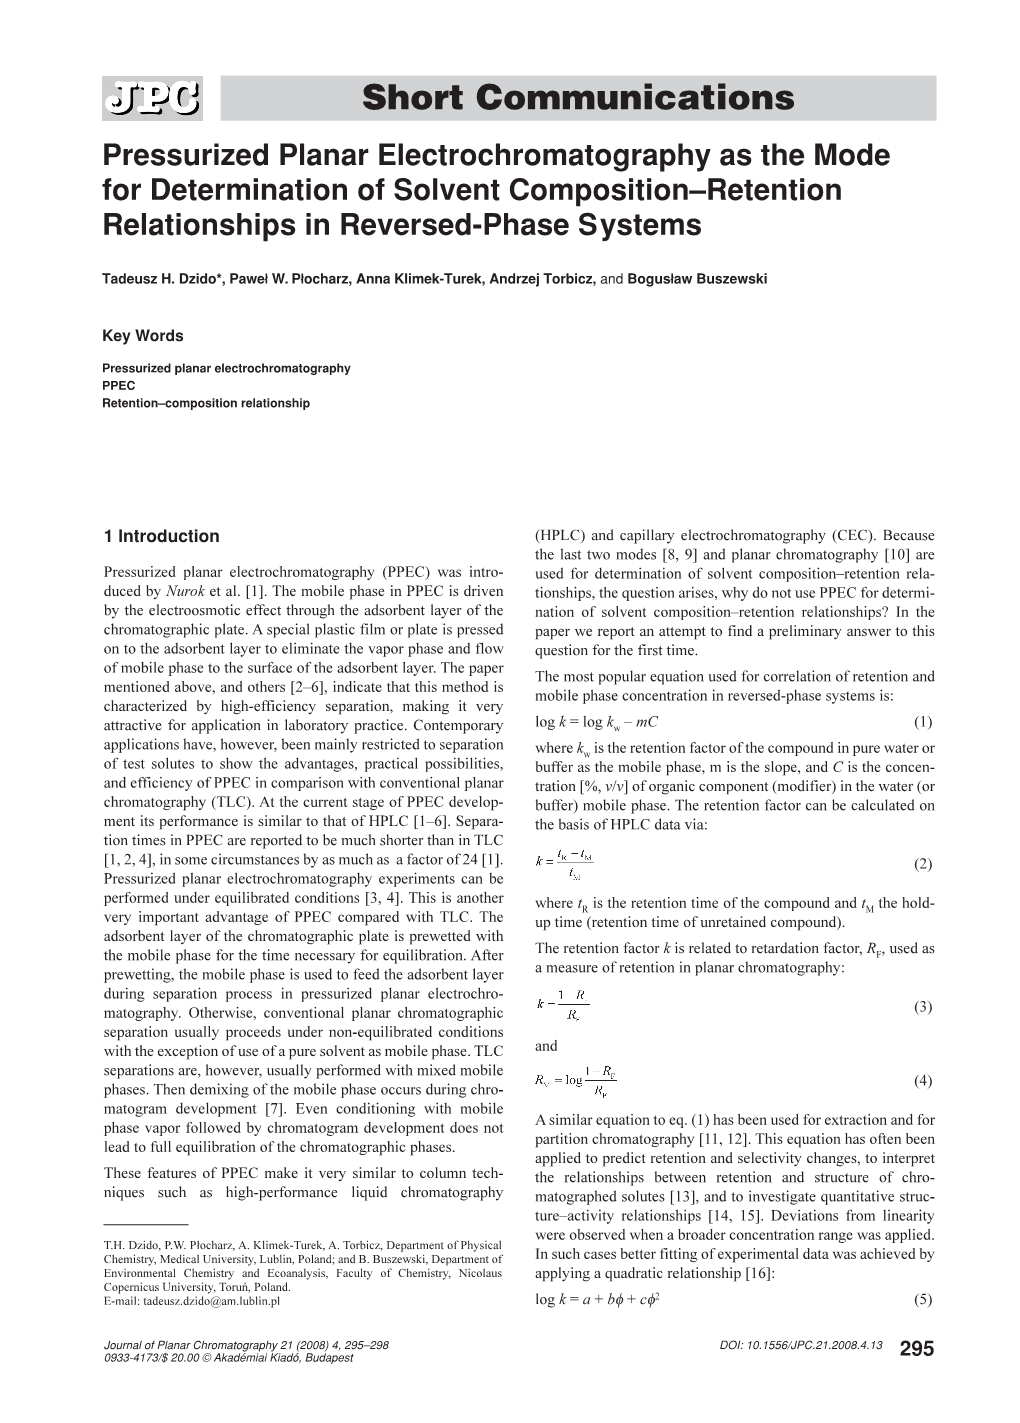 Short Communications Pressurized Planar Electrochromatography As the Mode for Determination of Solvent Composition–Retention Relationships in Reversed-Phase Systems